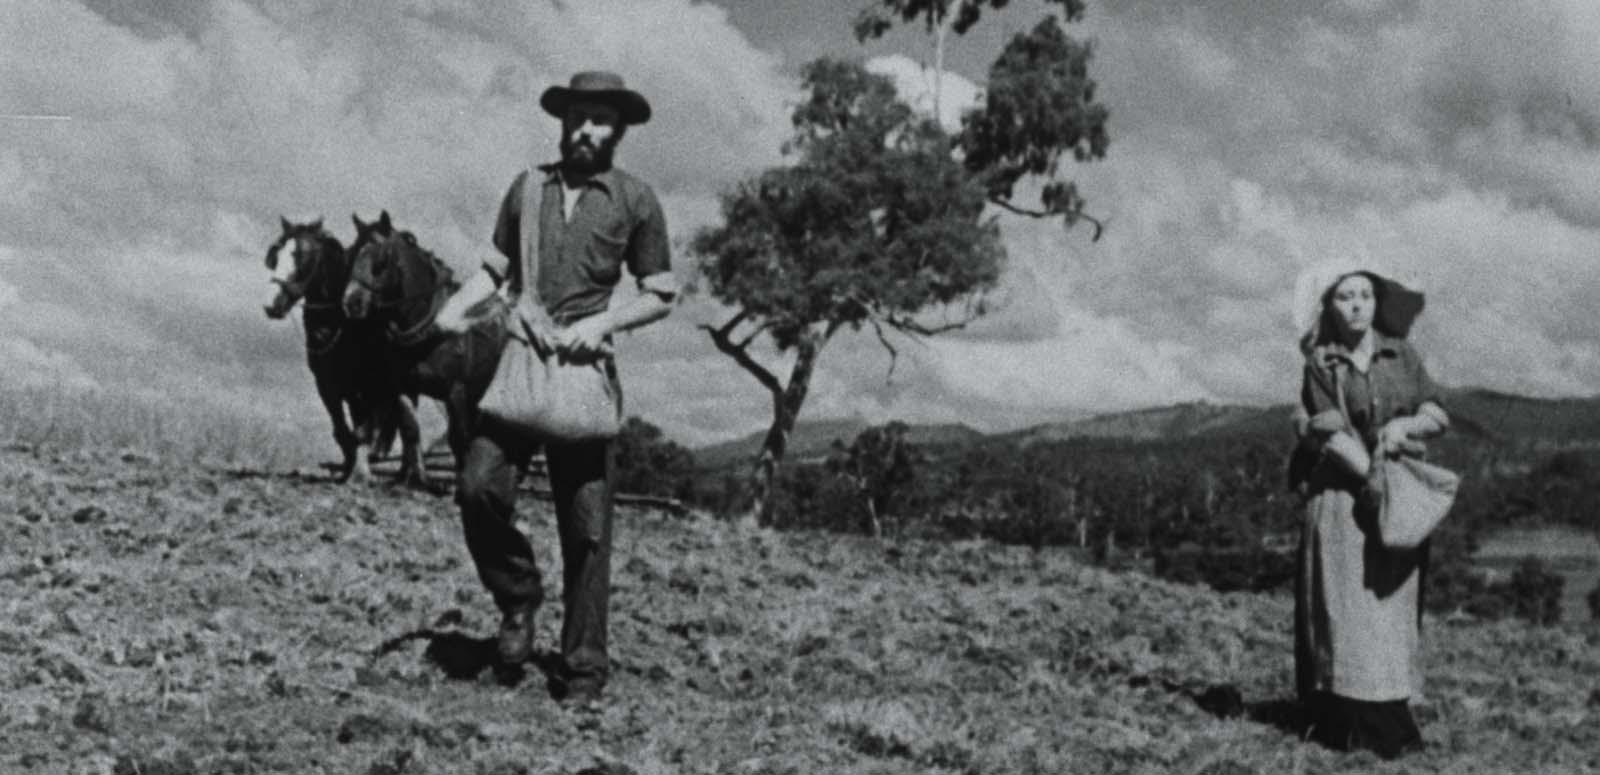 A man and woman sow seeds on an outback farm in a still from the 1949 film Sons of Matthew